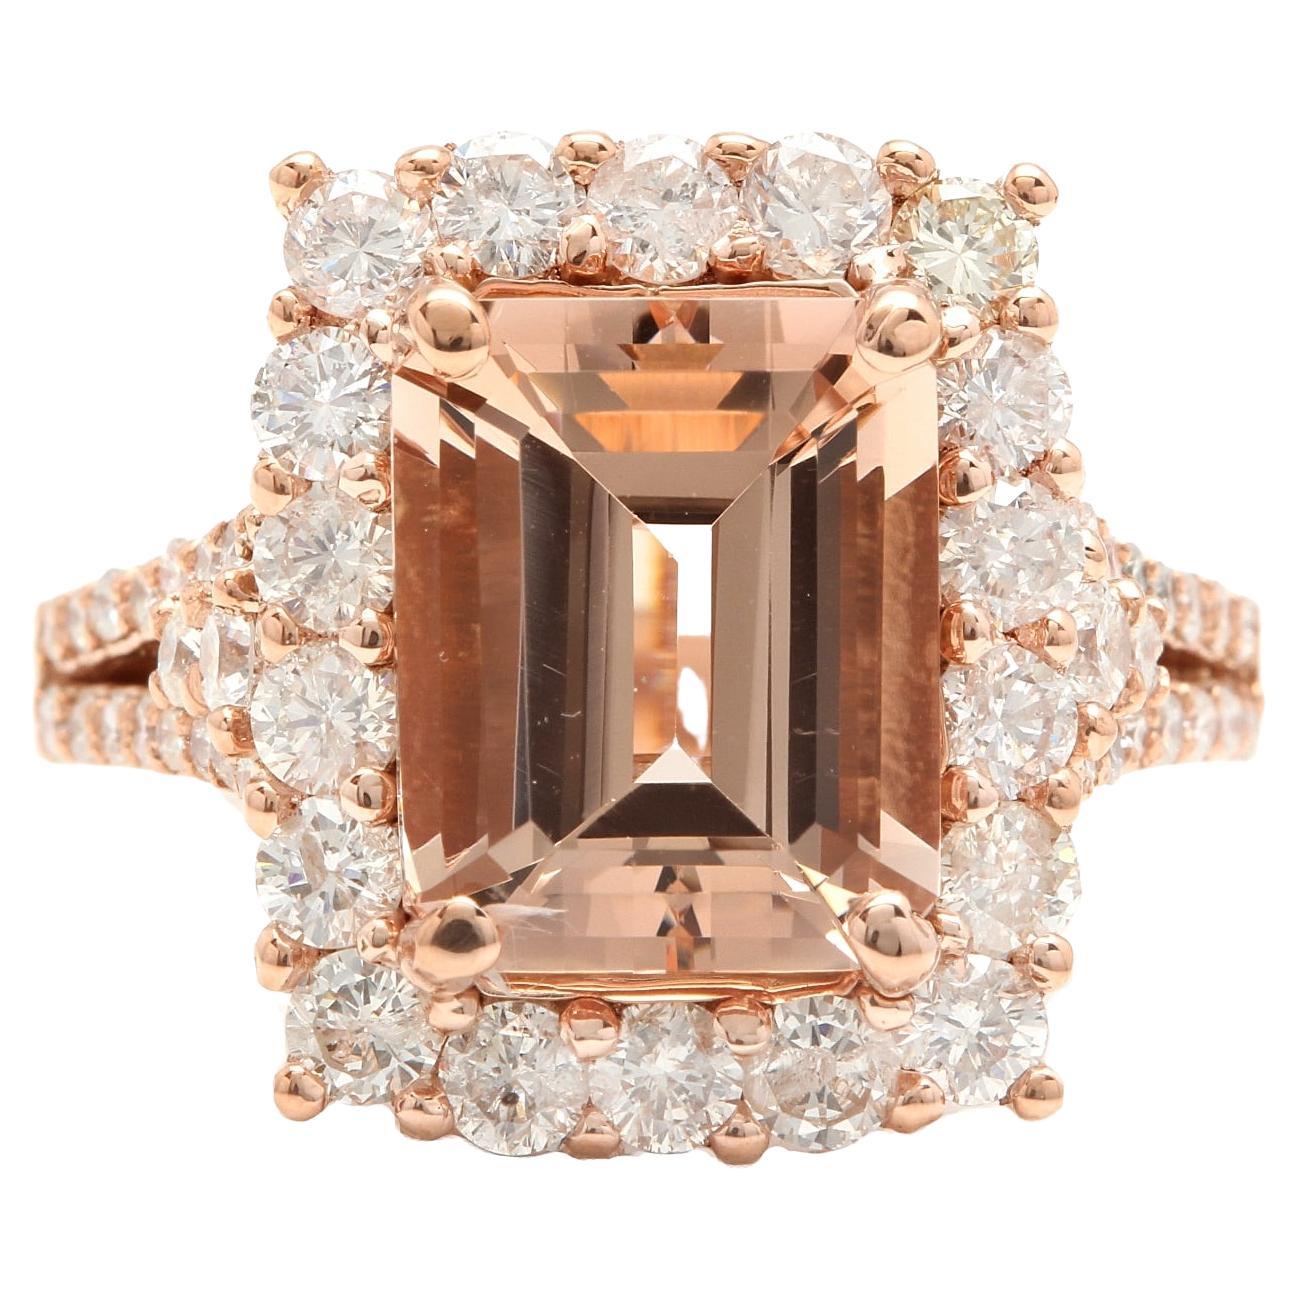 5.10 Carats Exquisite Natural Morganite and Diamond 14K Solid Rose Gold Ring